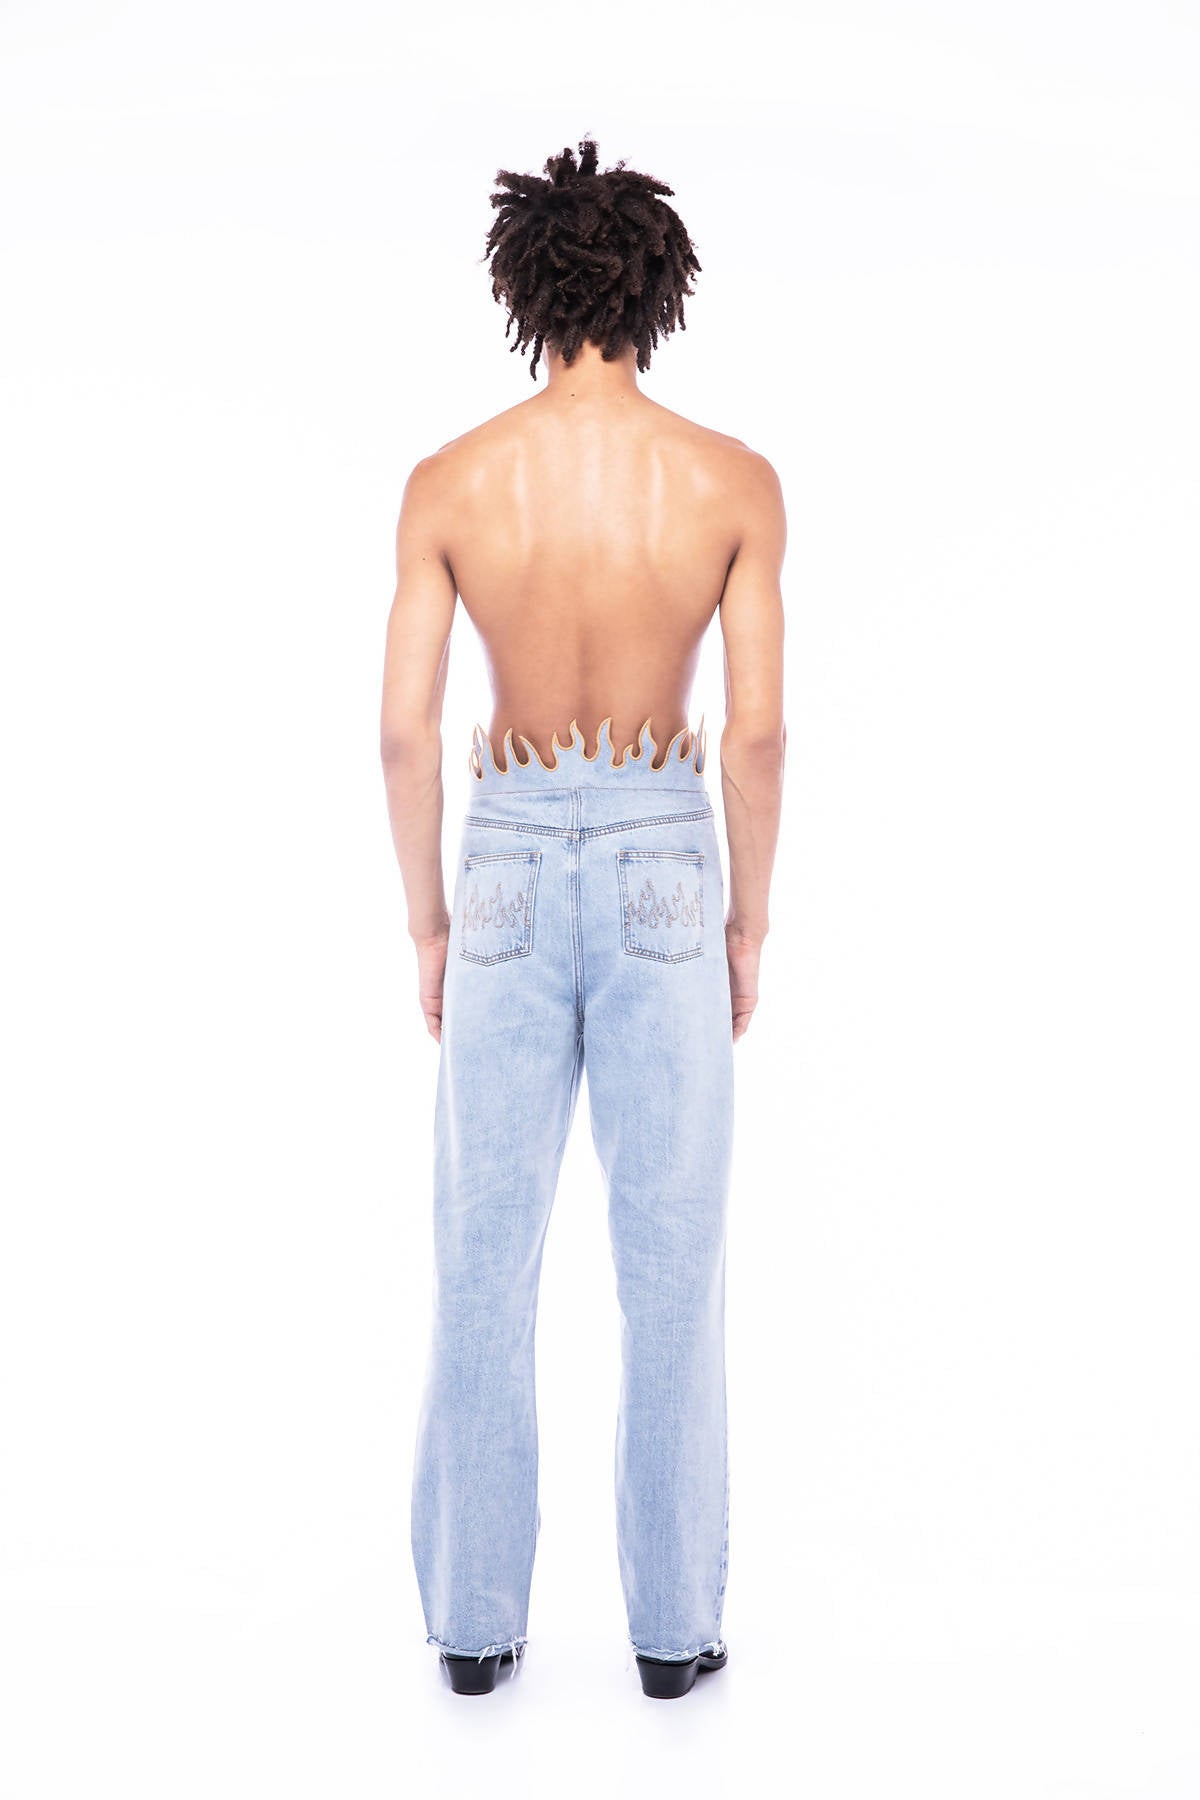 FBMT Clothing FBMT Hot Flame Day Jeans 